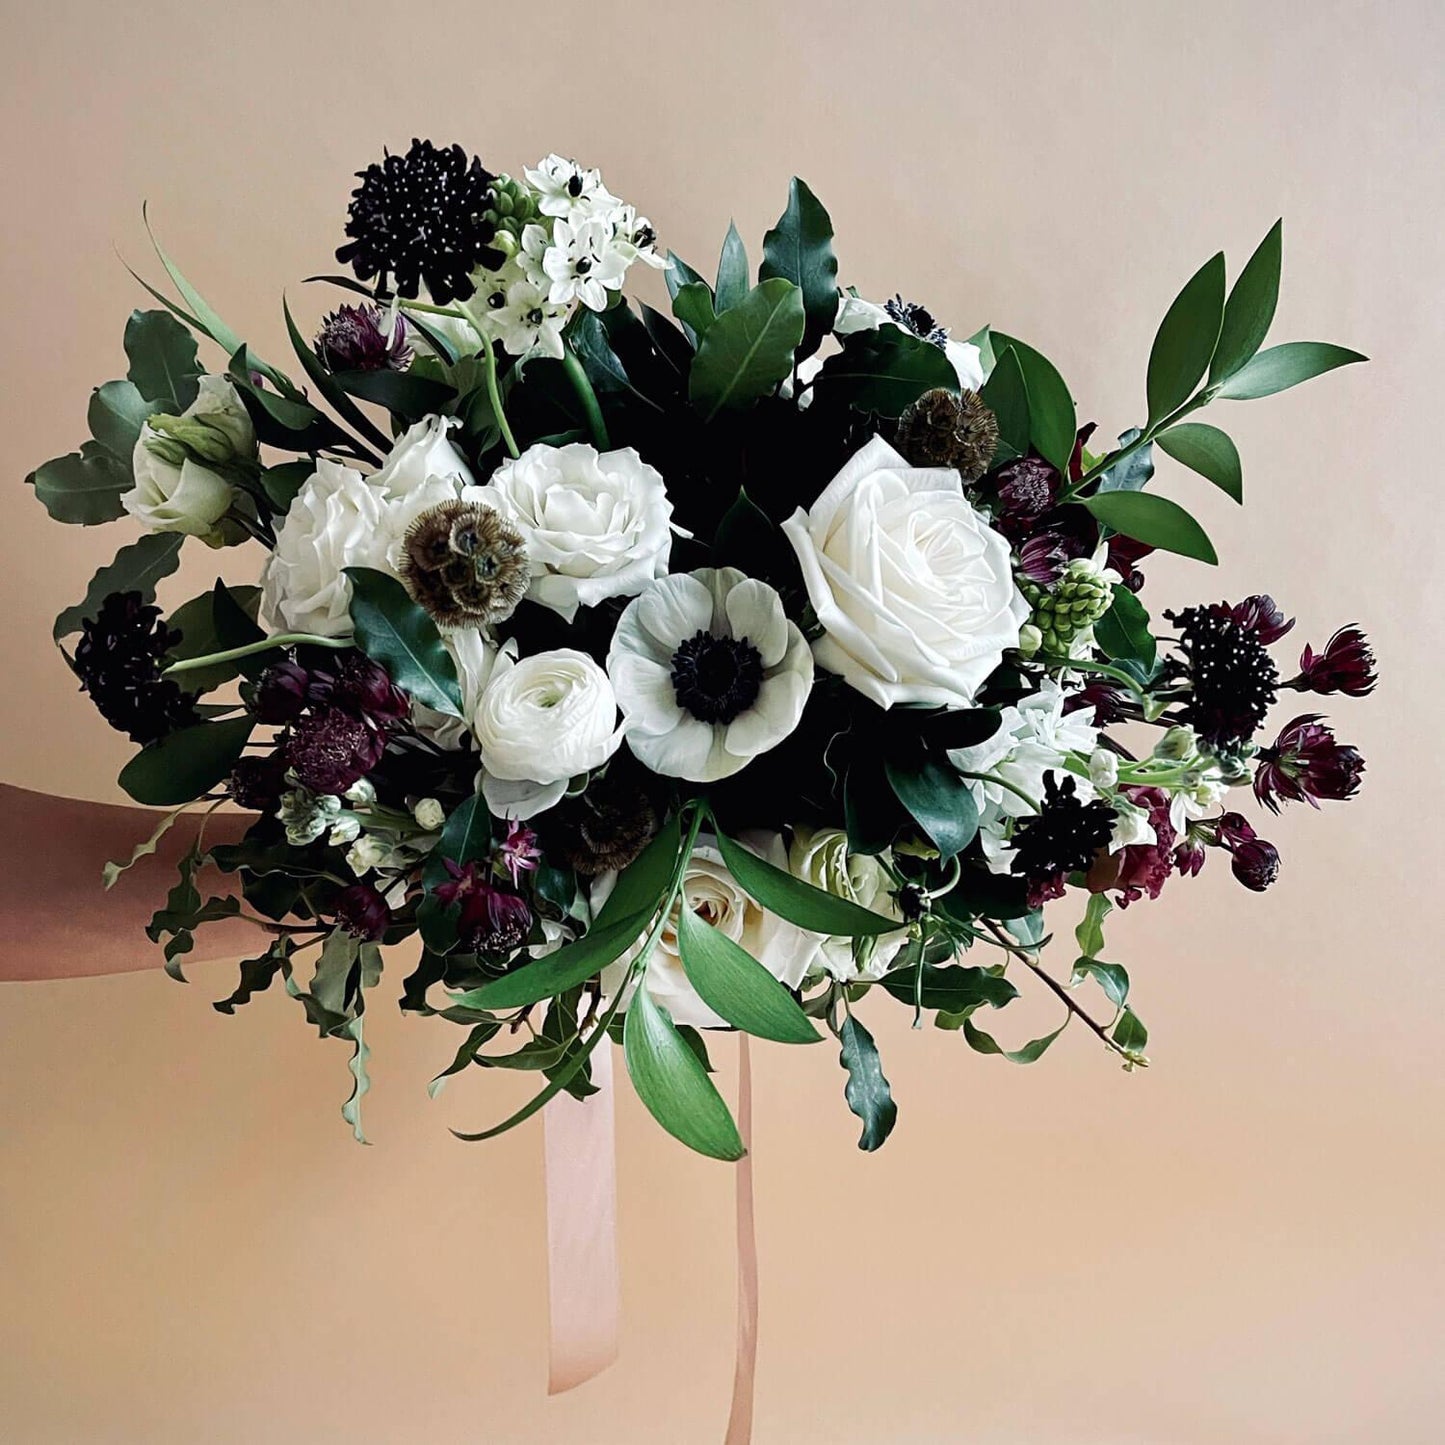 Beautiful bridal bouquet of assorted flowers including roses and poppies, adorned with a white ribbon, against a plain white background. Order online for wedding & event flowers from the best florist in Toronto near you.